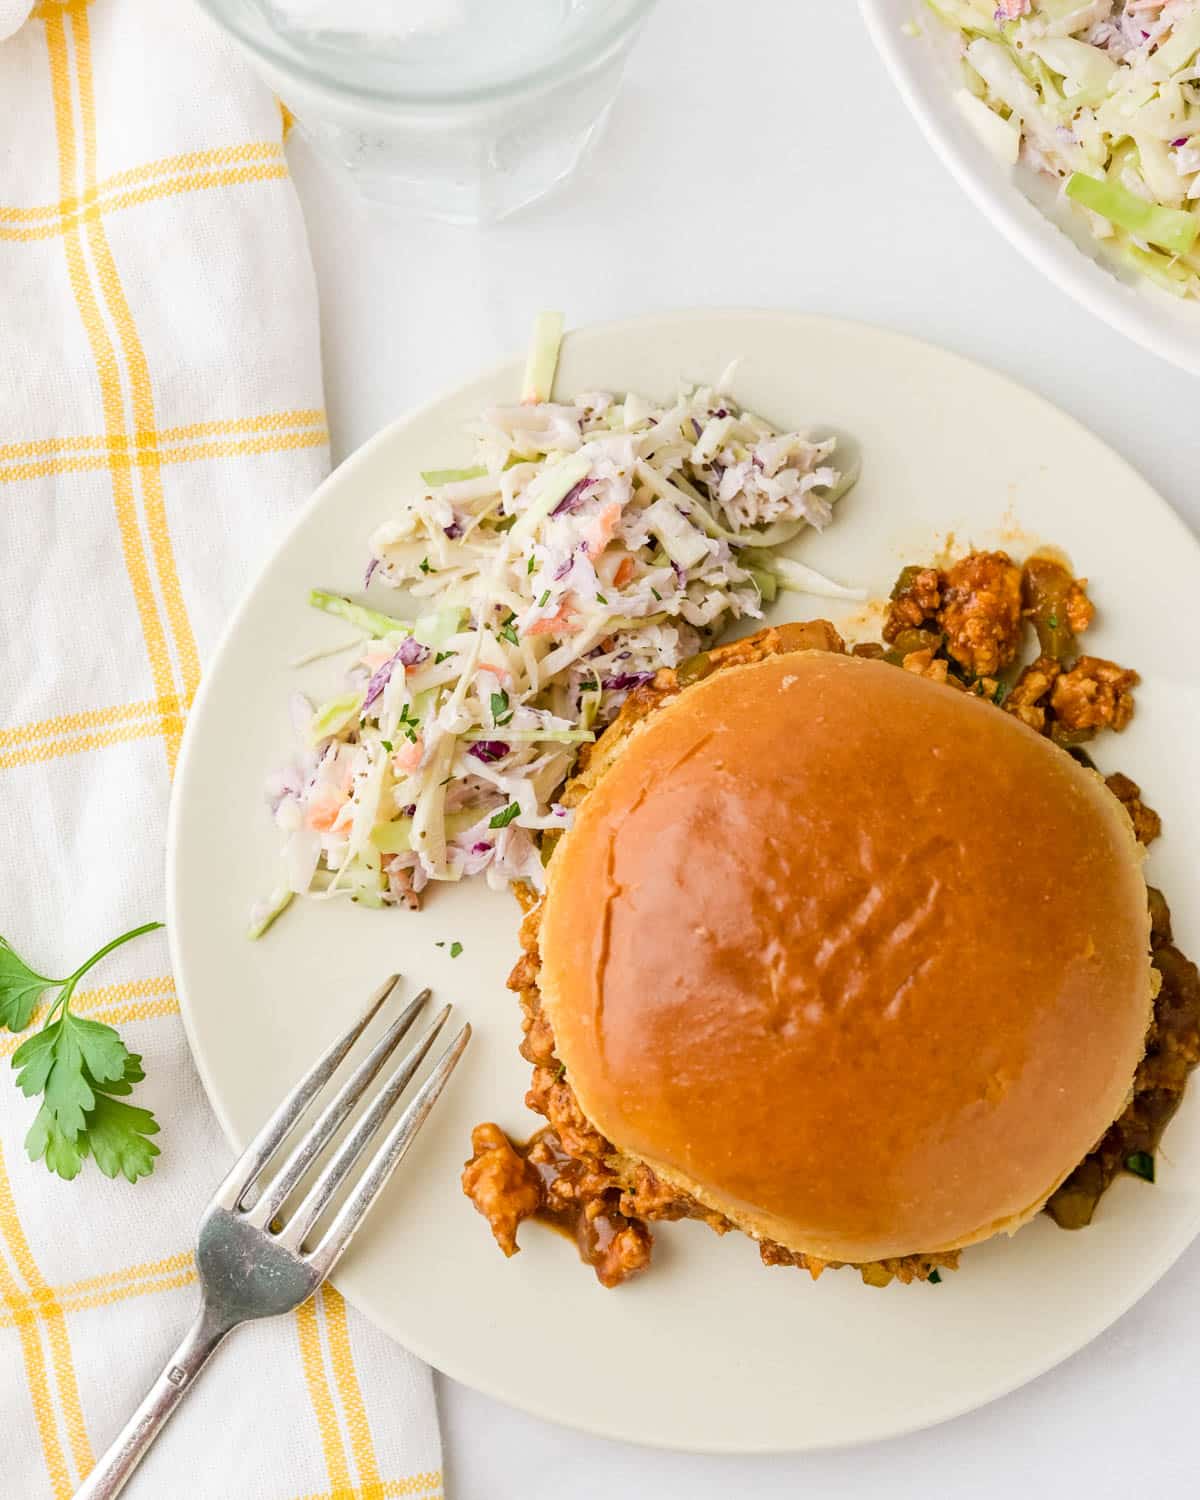 We are serving the turkey sloppy joes on a bun with coleslaw.